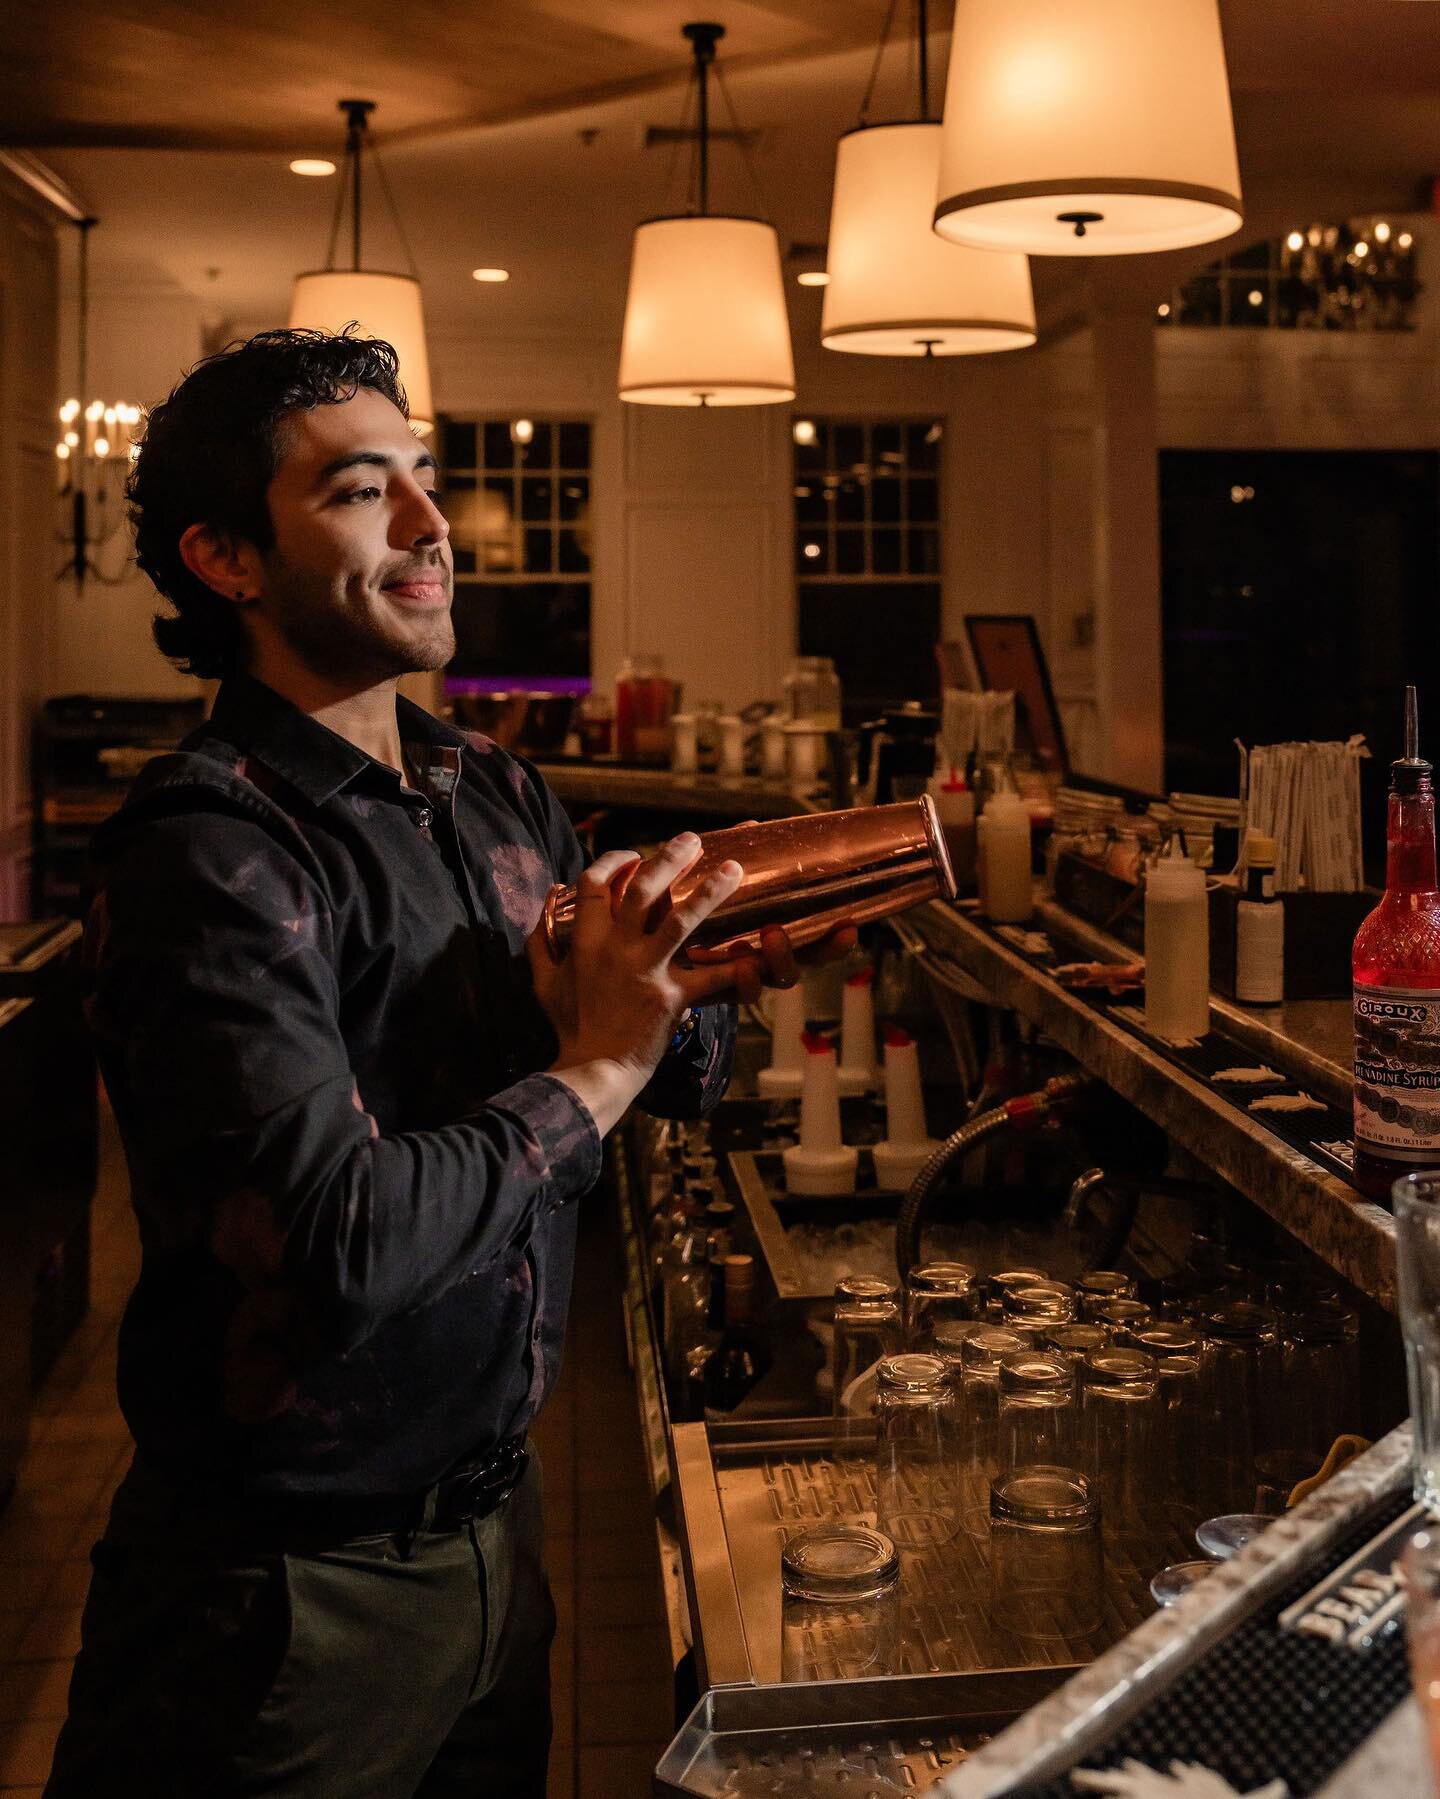 ⚡️ Meet Francisco, our talented mixologist who&rsquo;s here to jazz up your special day. His passion for unique flavors and curiosity shines through in every drink he creates, crafting unforgettable experiences for you and your guests all night long.